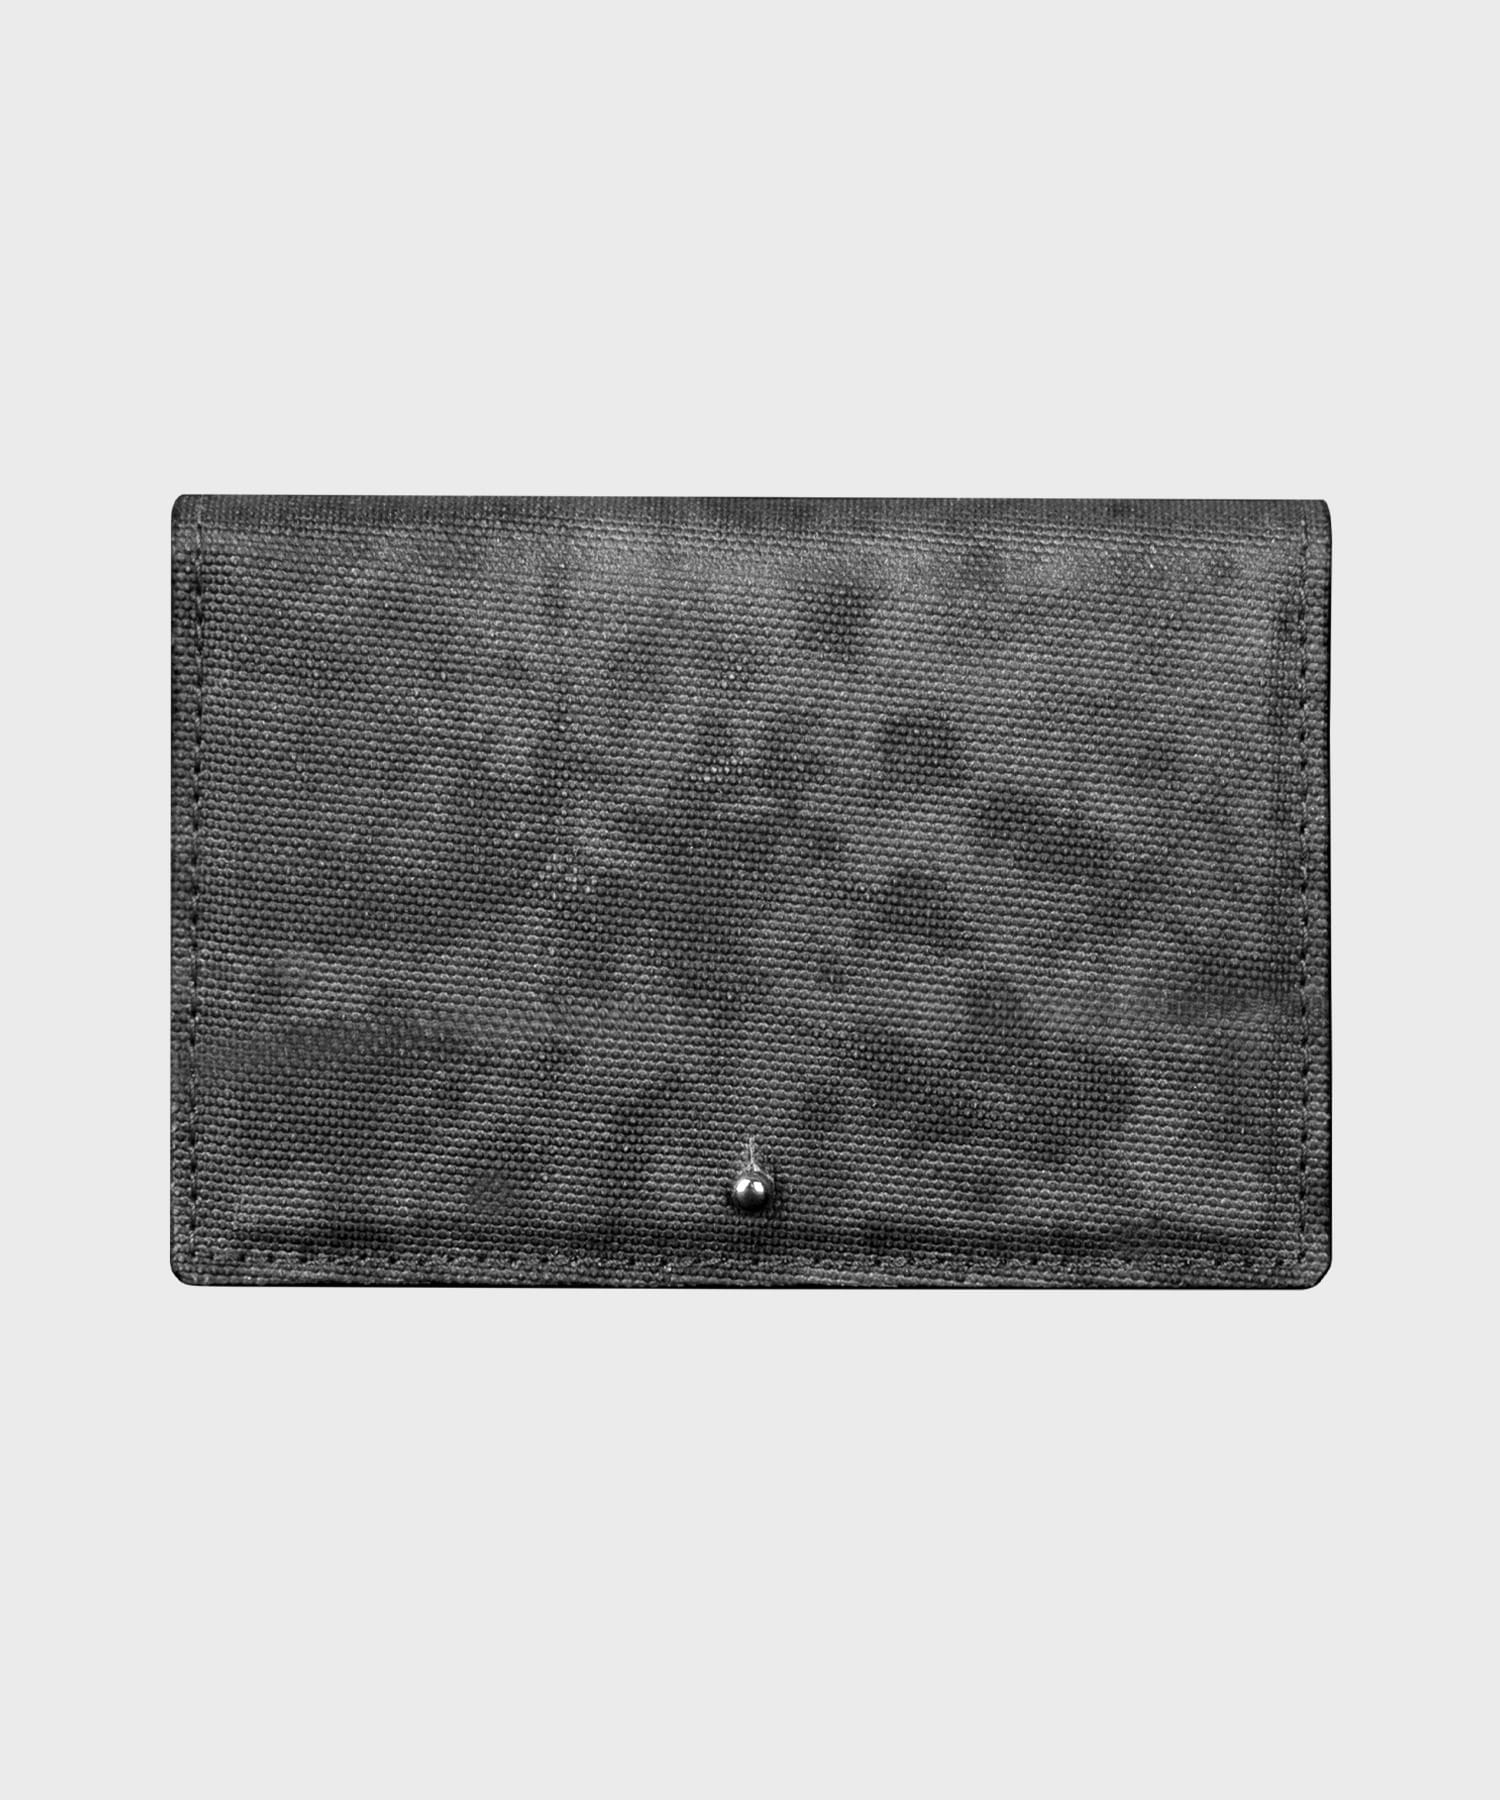 OM BUTTON STUD WALLET (GRAY) / UPCYCLED